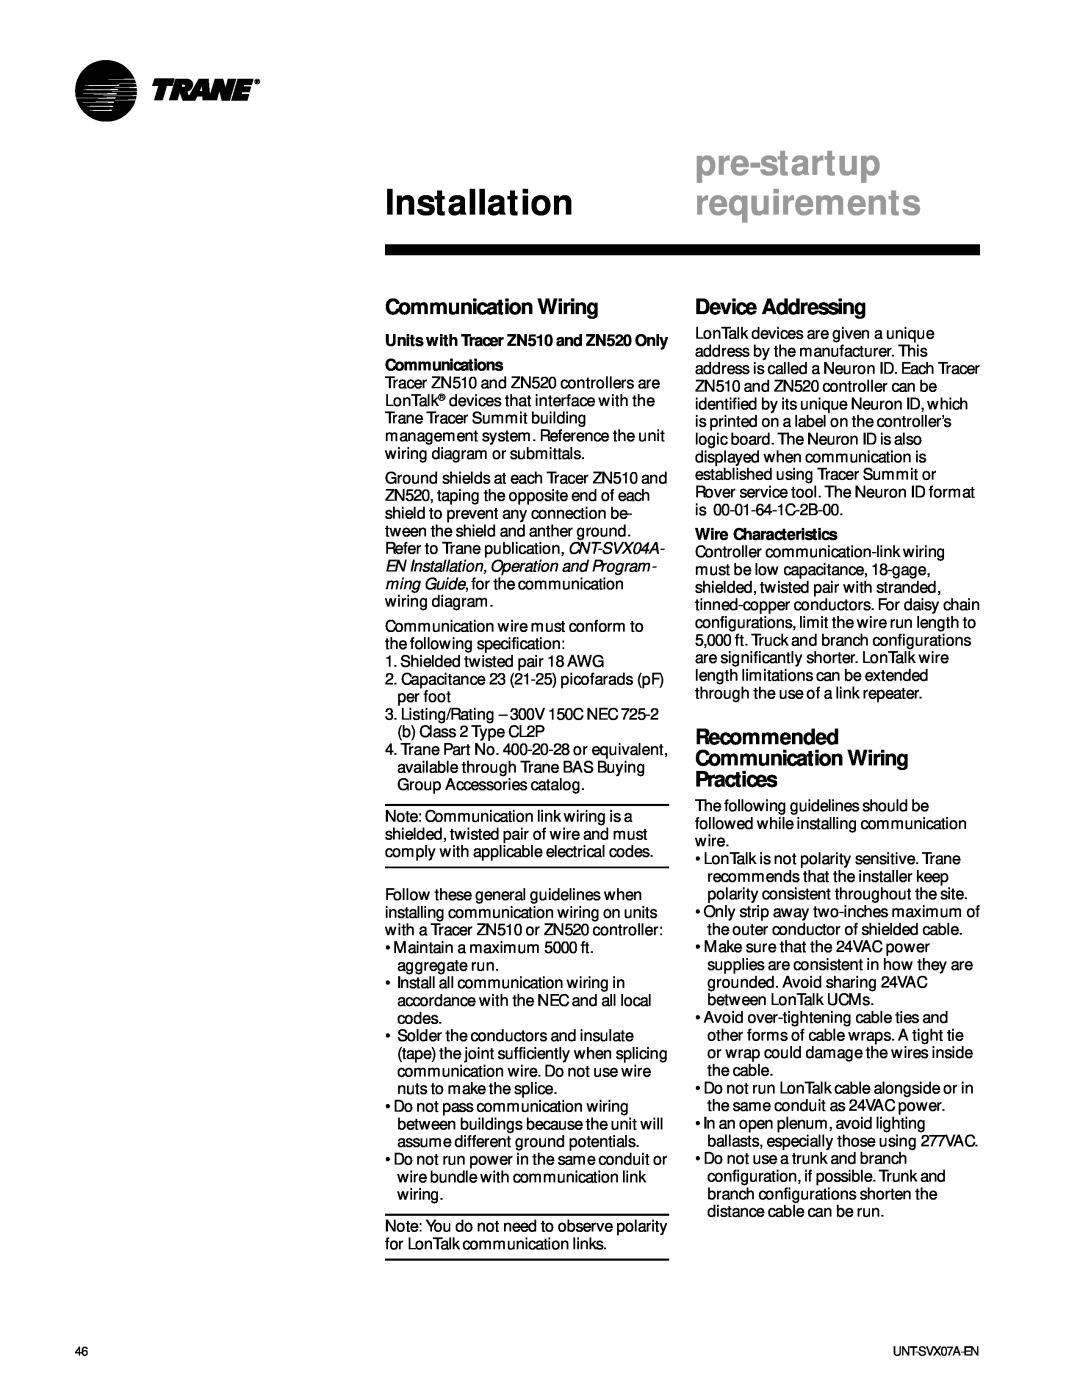 Trane UNT-SVX07A-EN pre-startup, Device Addressing, Recommended Communication Wiring Practices, Wire Characteristics 